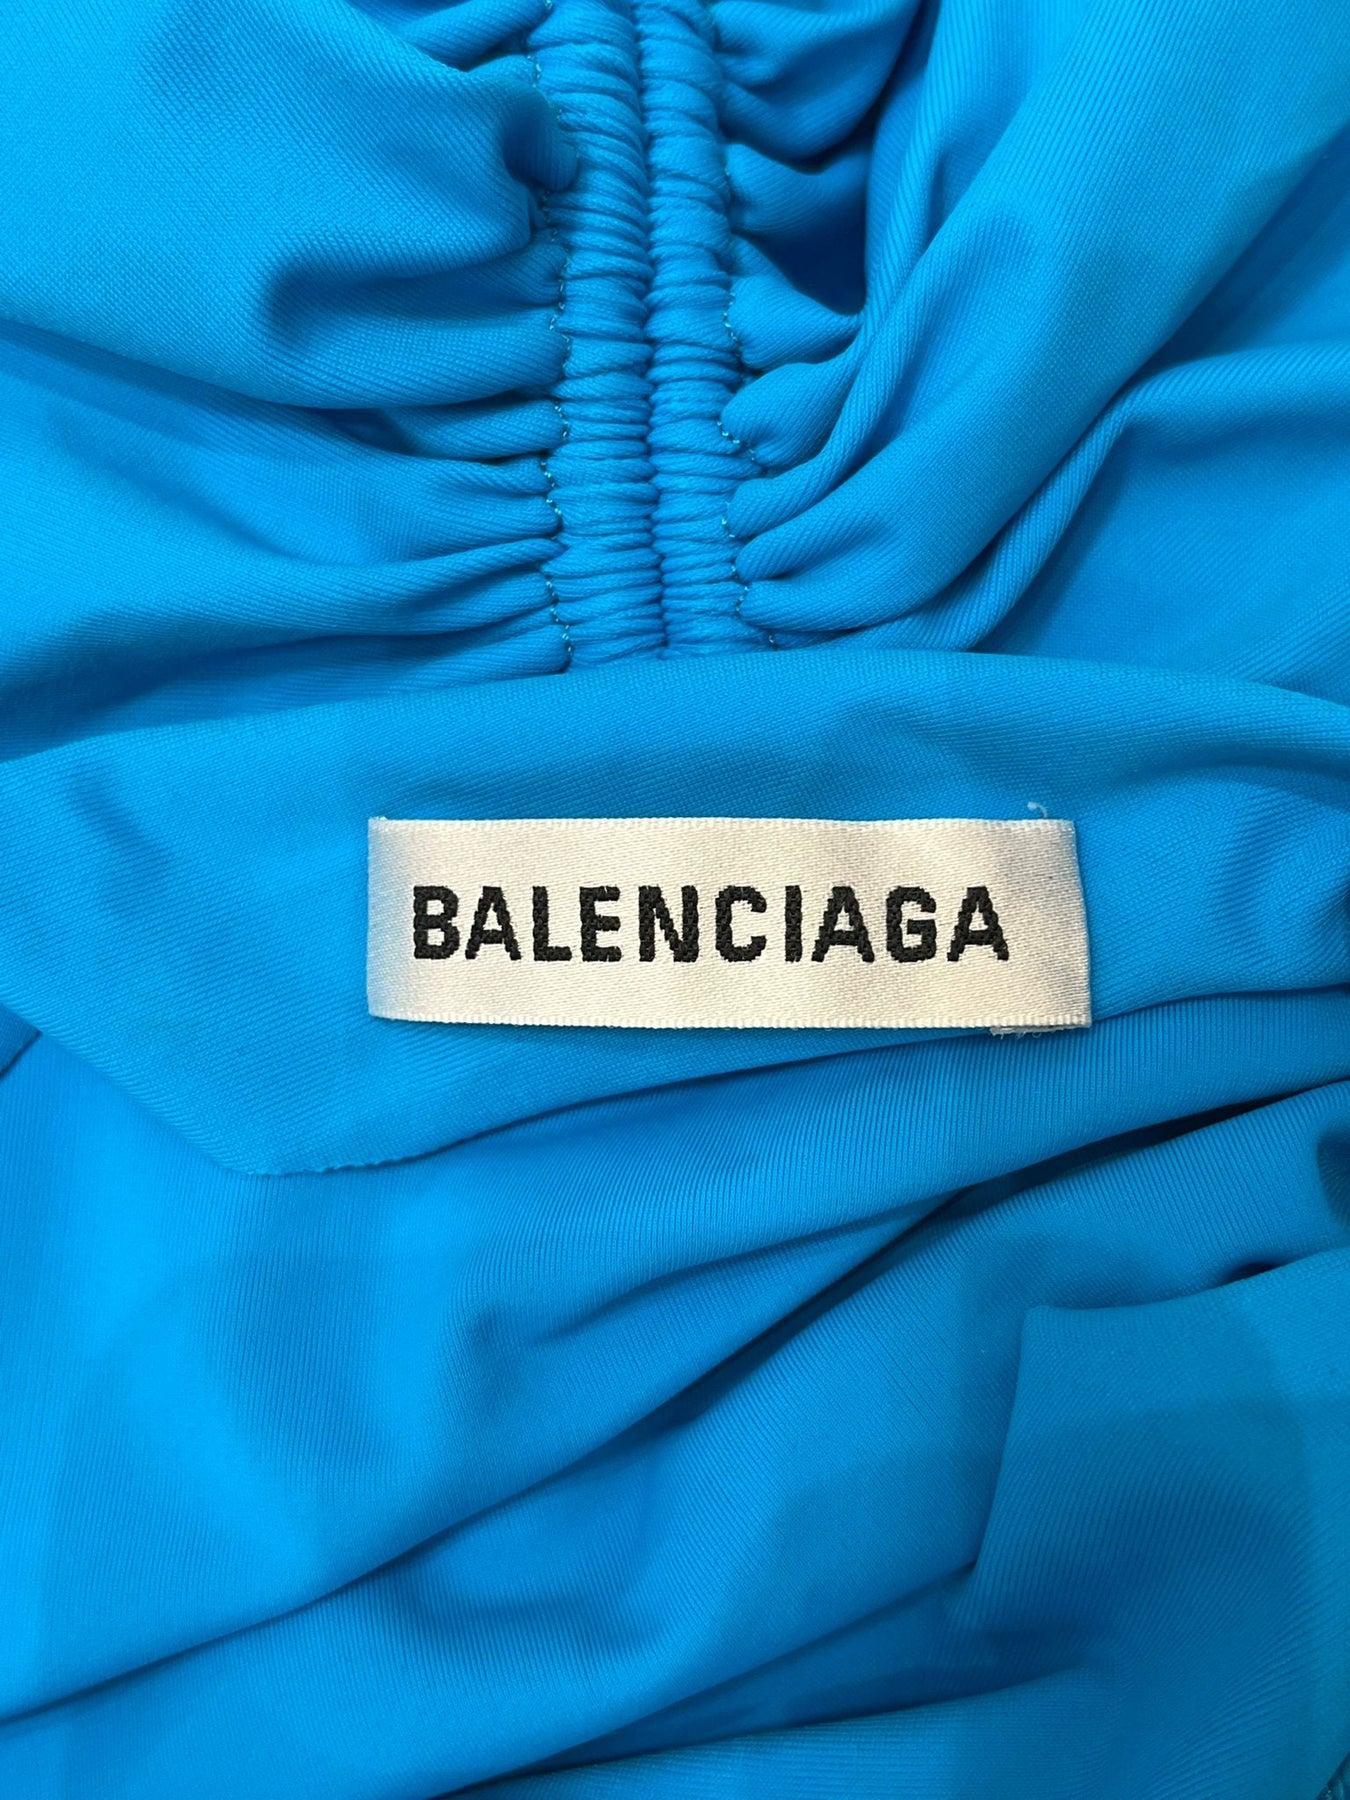 Balenciaga Ruched Stretch Jersey Dress For Sale 1